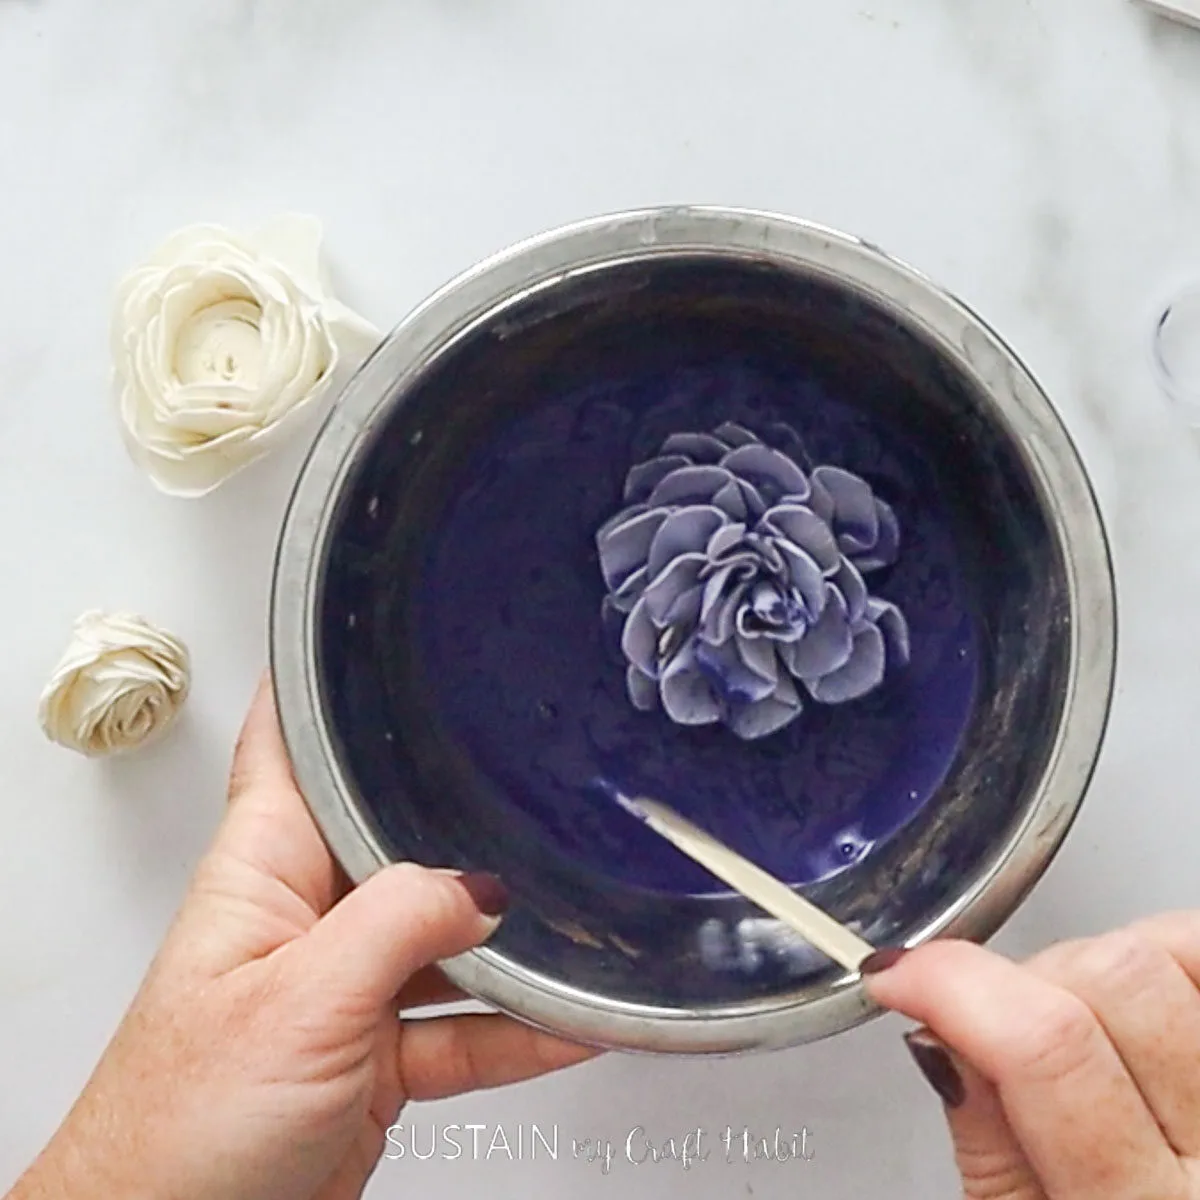 Dyed wood flower in a bowl.